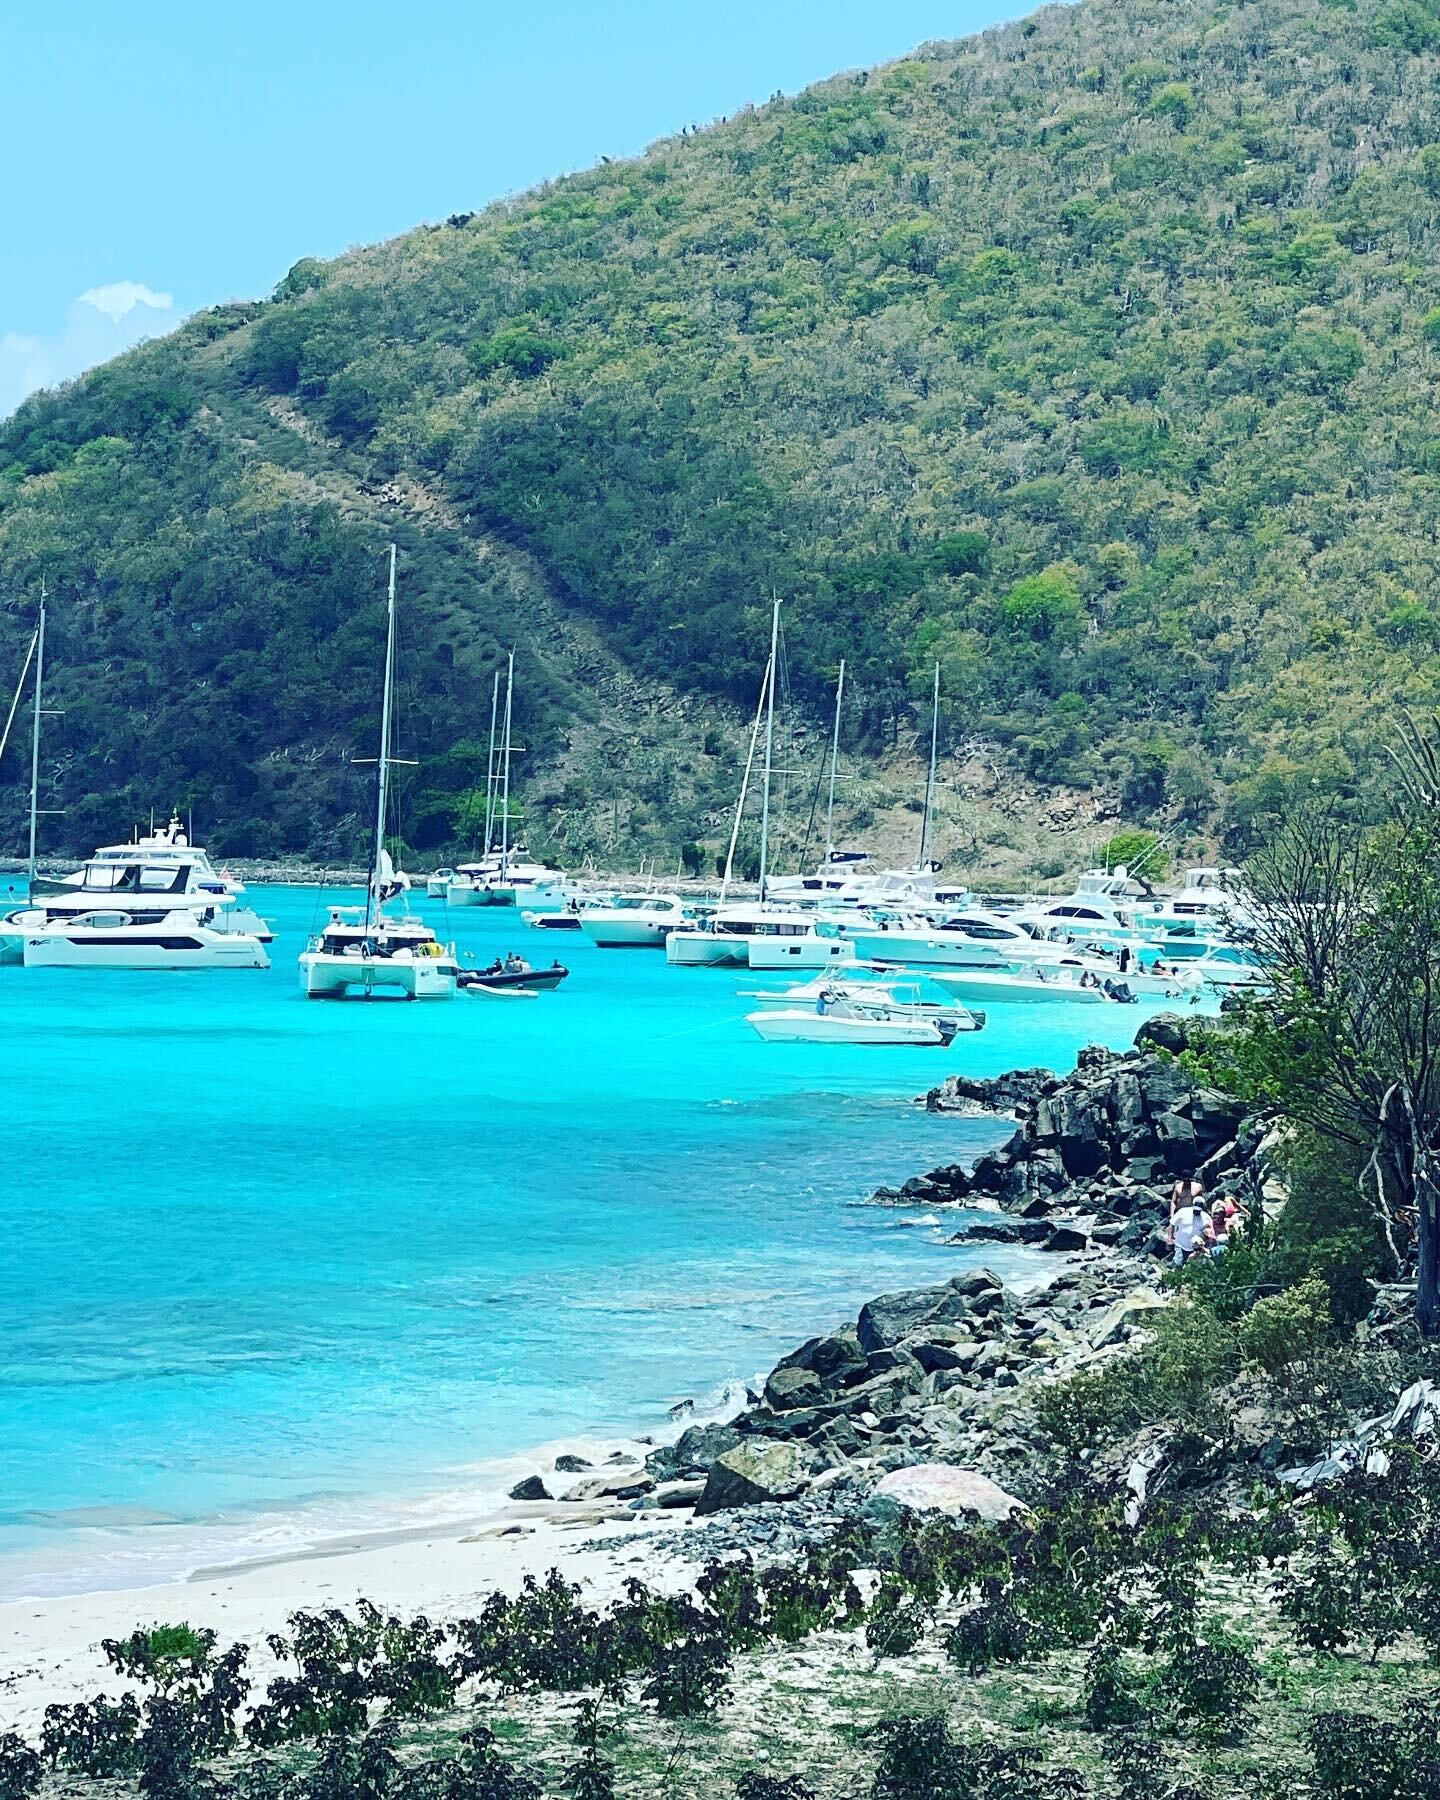 Great view of a very busy White Bay in JVD from Escape Villa on this beautiful Sunday afternoon.  Book your stay with us today. www.escape2bvi.com #oceanfrontproperty #bvilove #jostvandykebvi #beachvacay